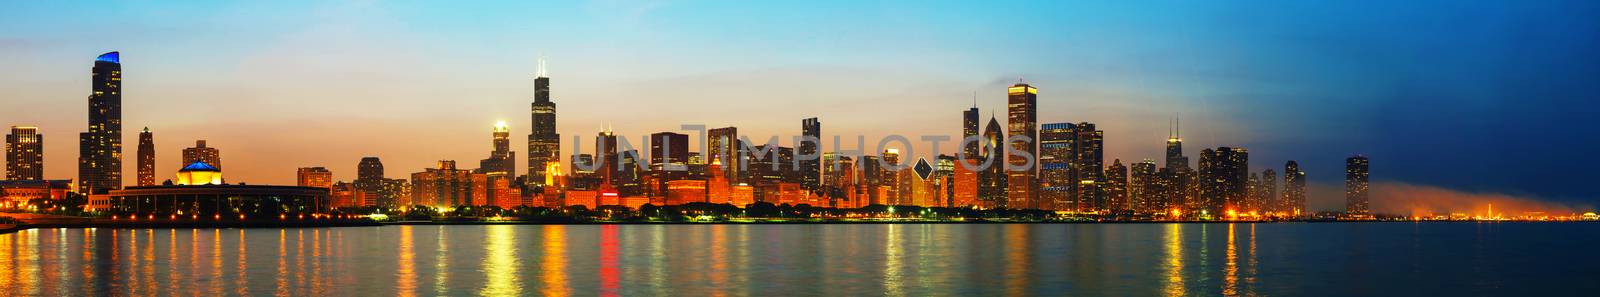 Chicago downtown cityscape panorama by AndreyKr